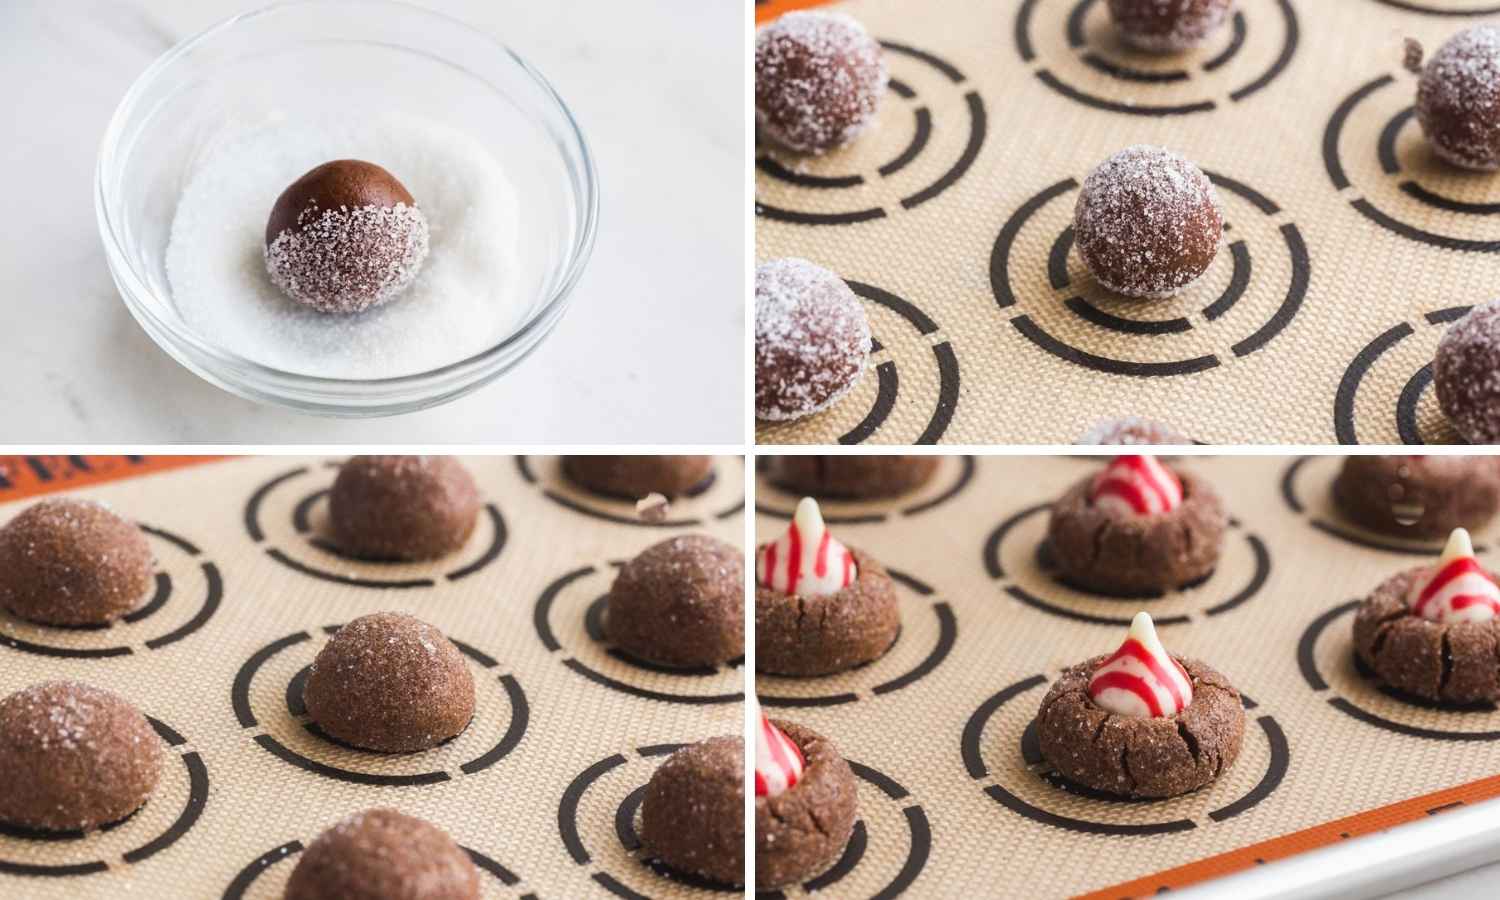 Steps showing how to make Chocolate Peppermint Kiss Cookies